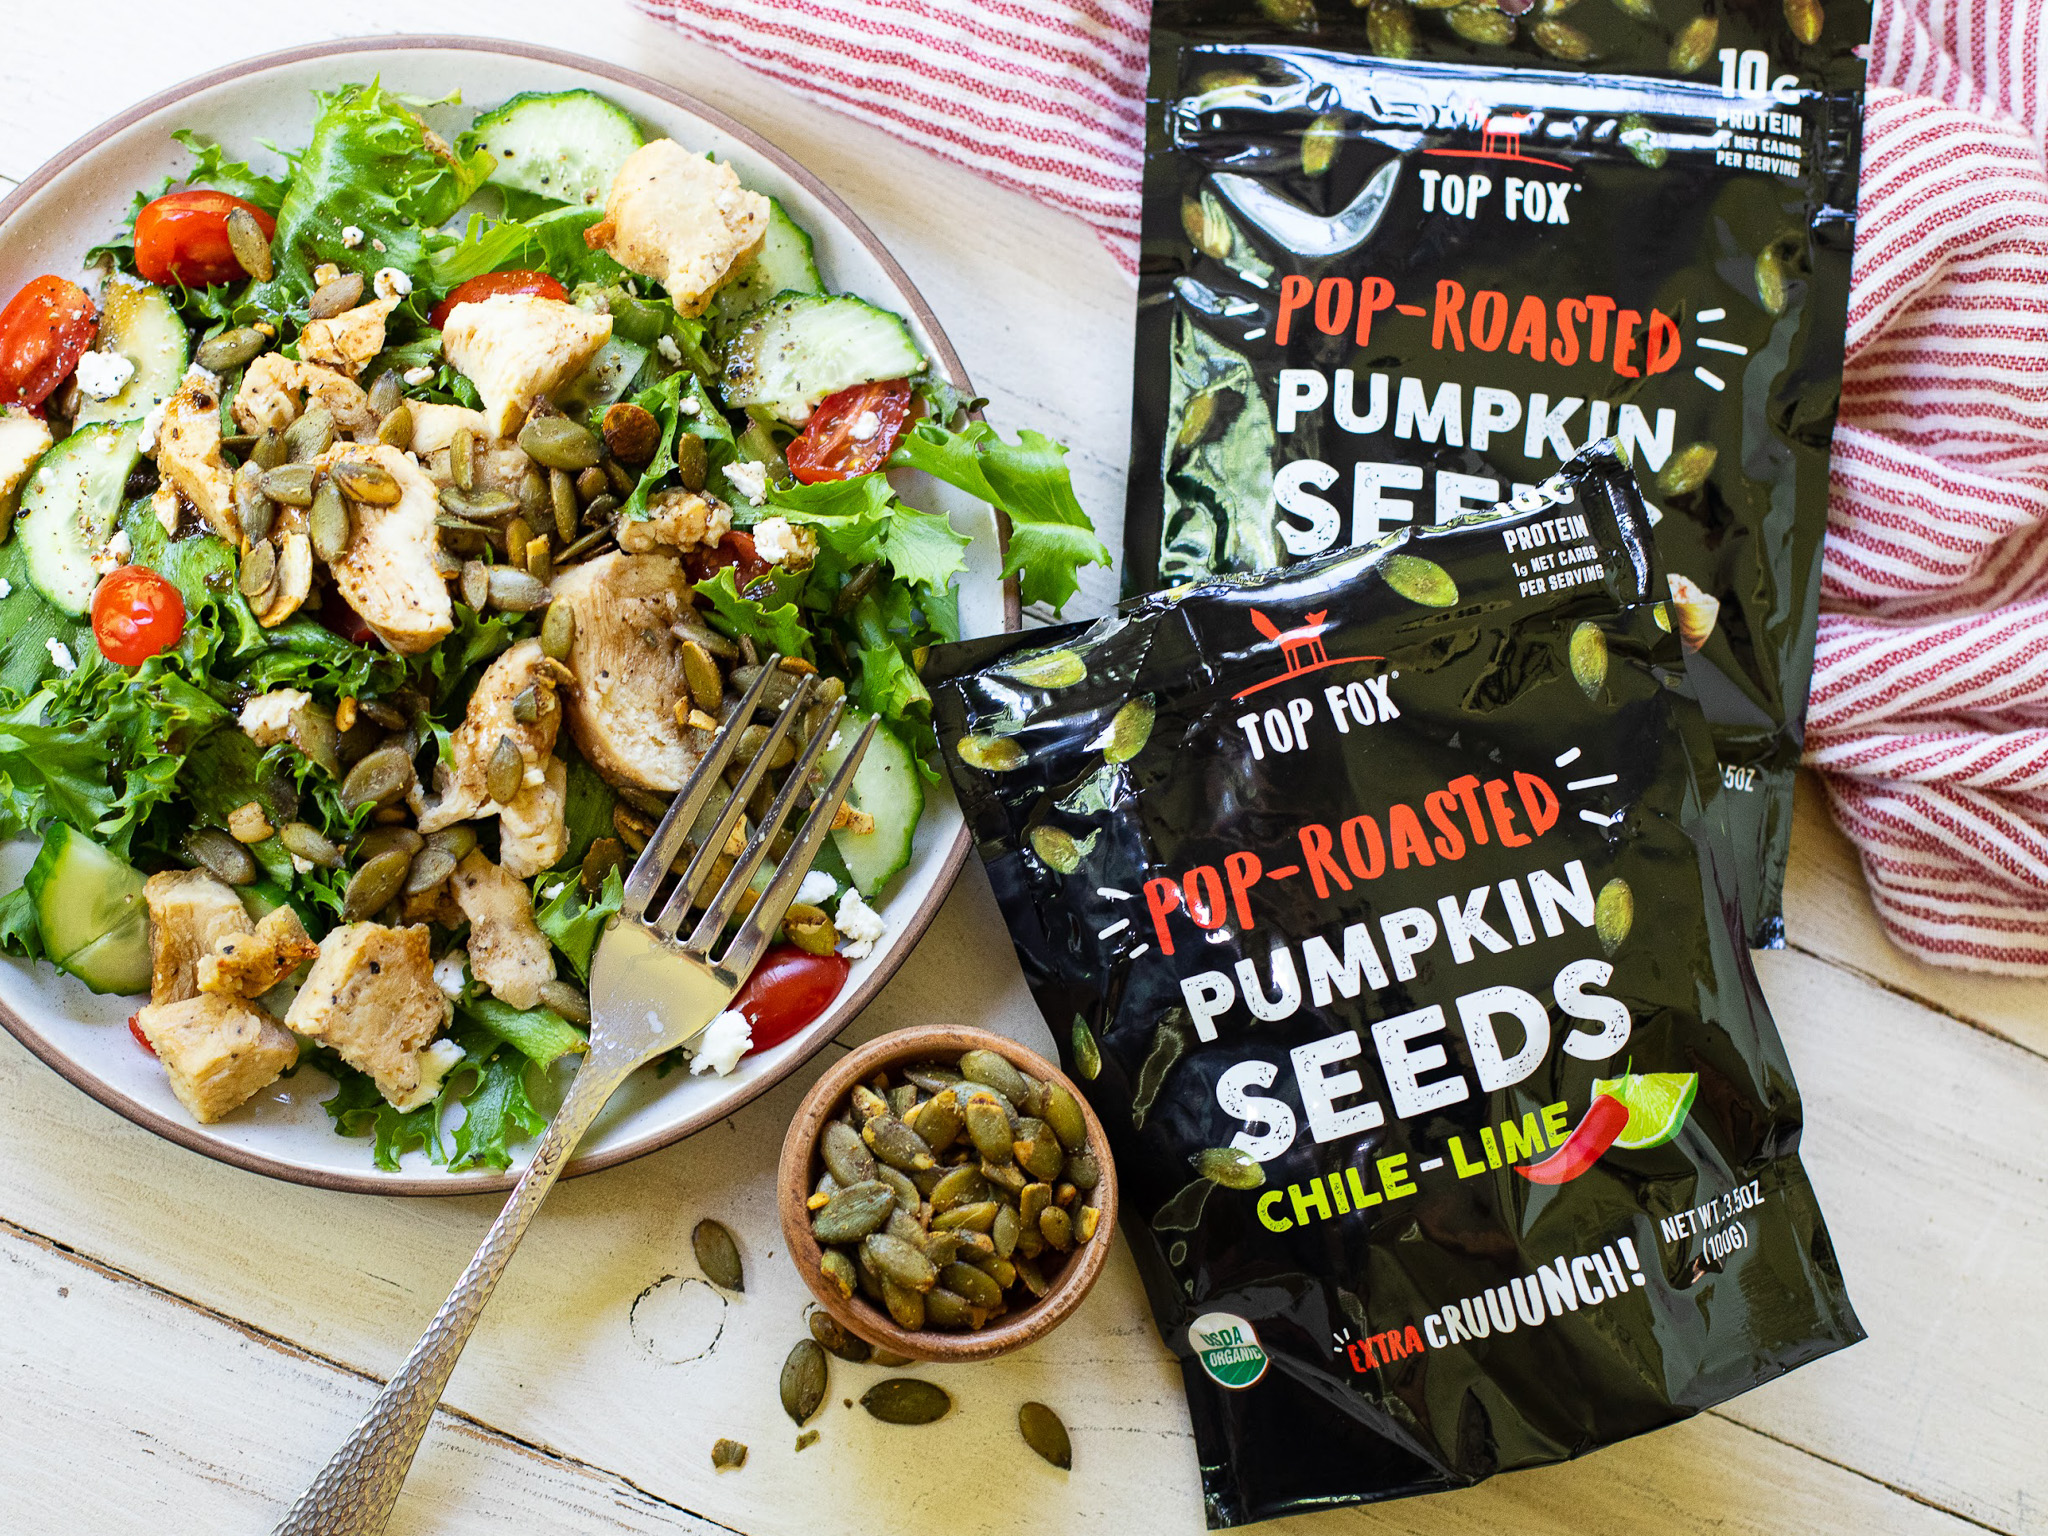 Get A Bag Of Top Fox Pumpkin Seeds For As Low As $1.50 At Publix